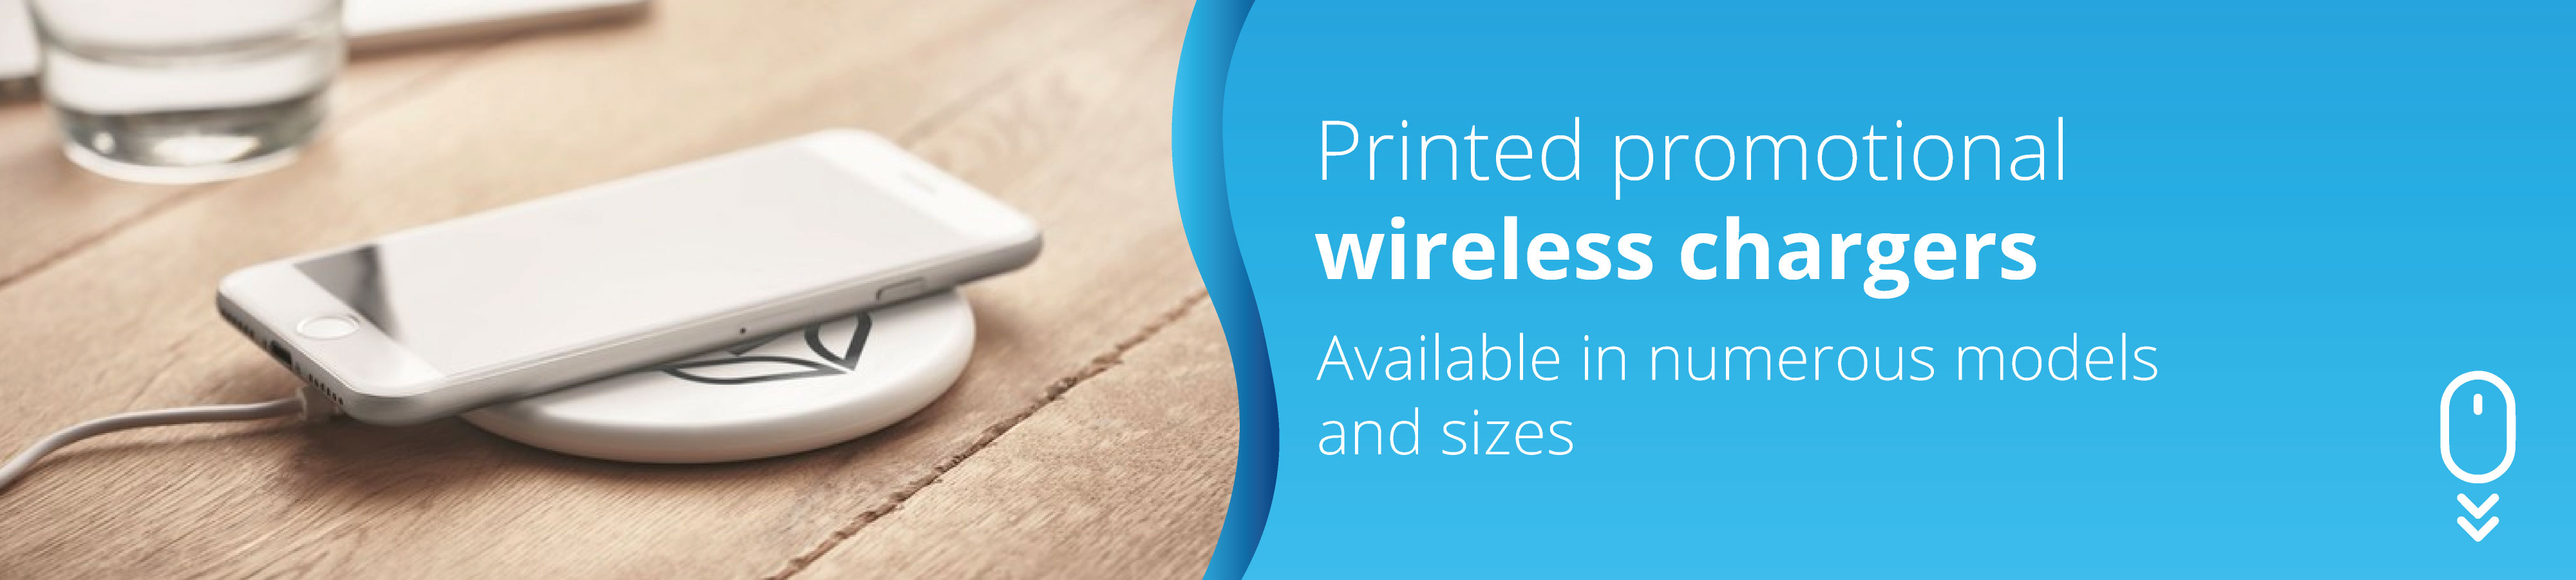 printed-promotional-wireless-chargers